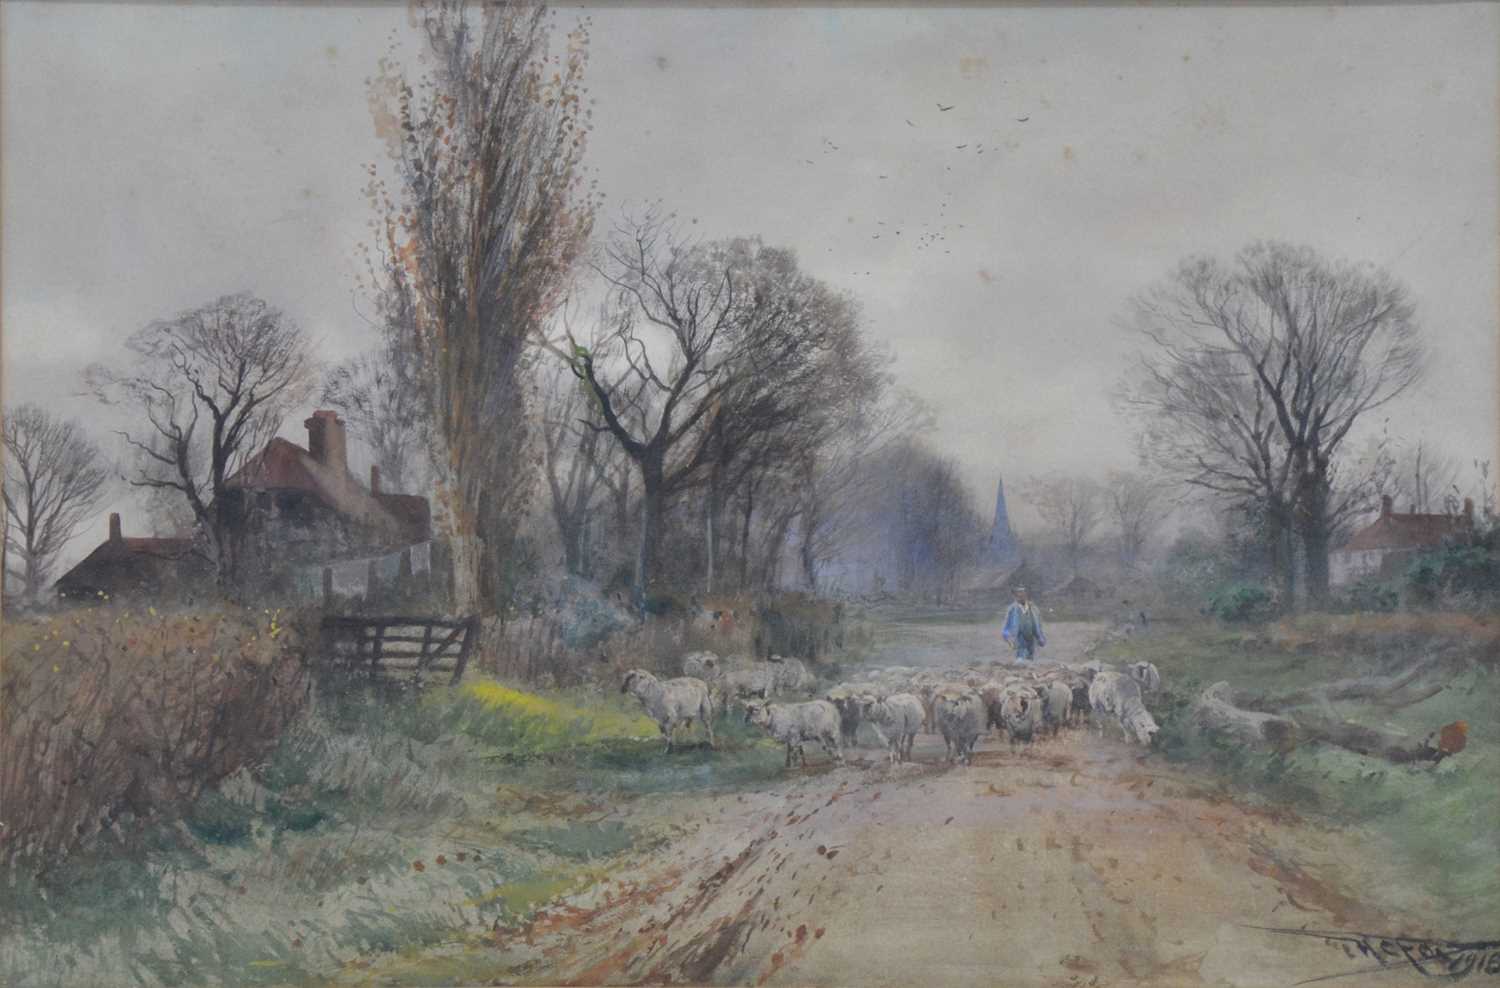 Henry Charles Fox, Sheep driving, and Ploughing near Twyford, a pair